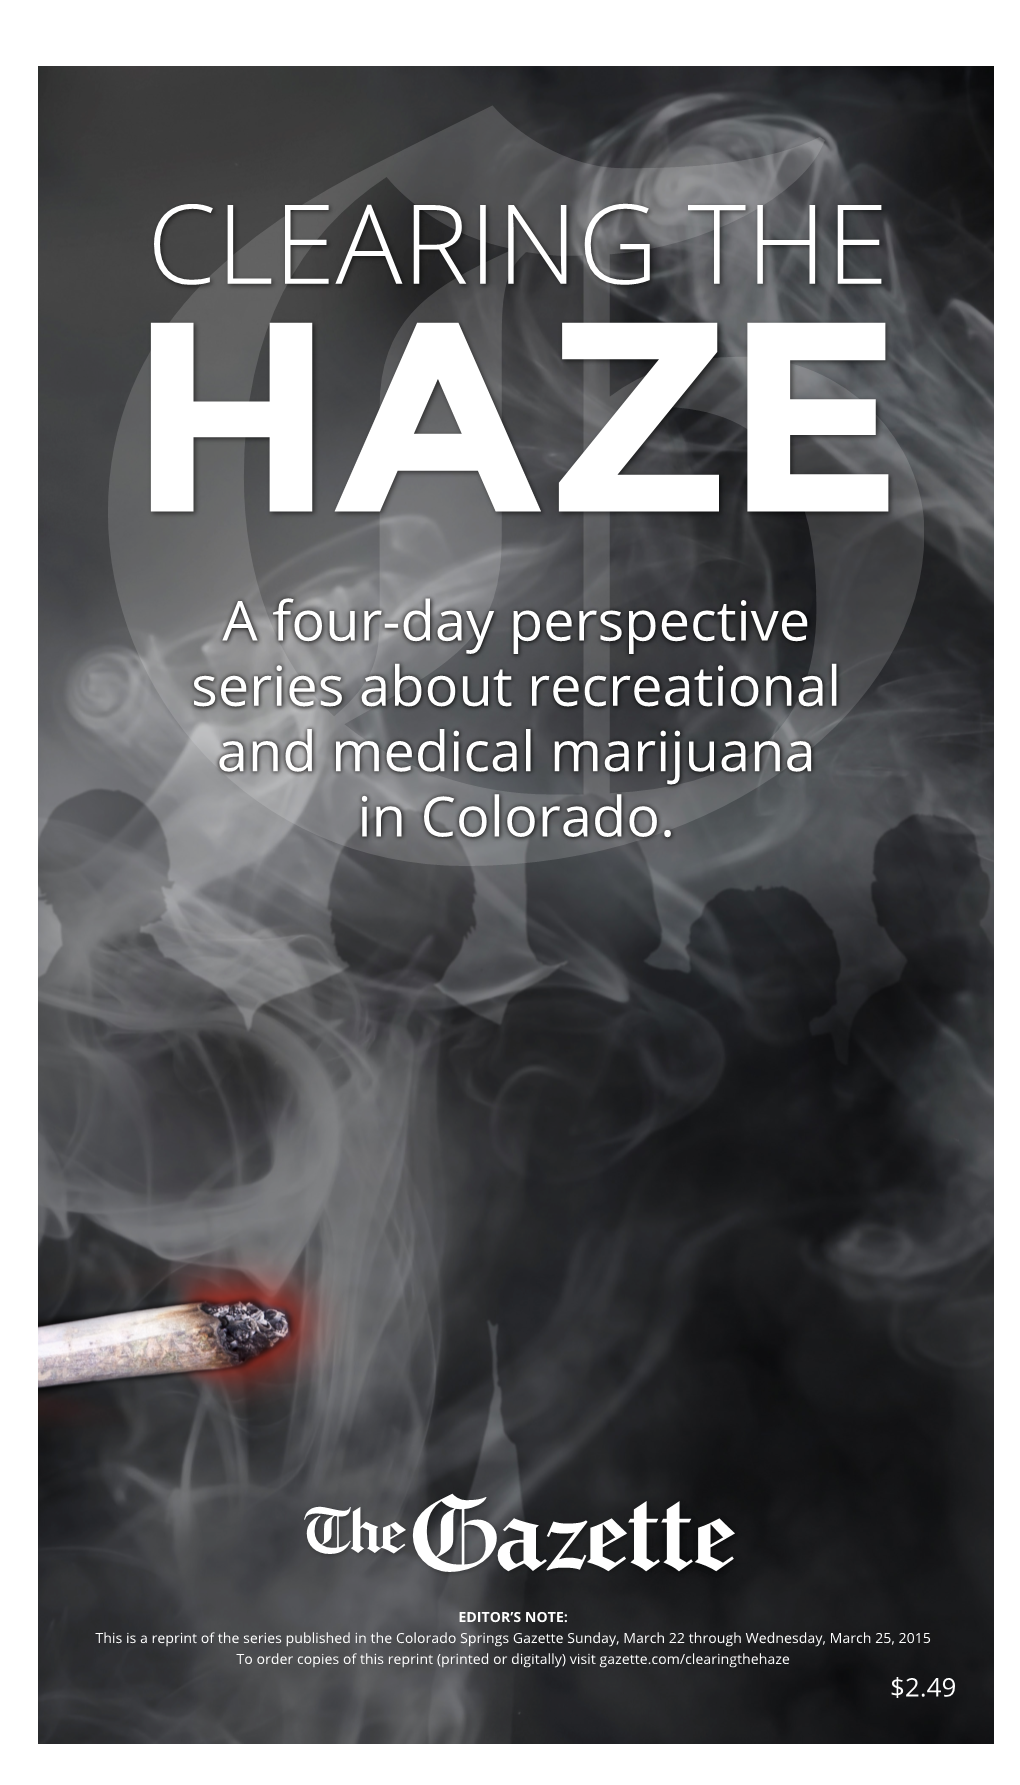 A Four-Day Perspective Series About Recreational and Medical Marijuana in Colorado